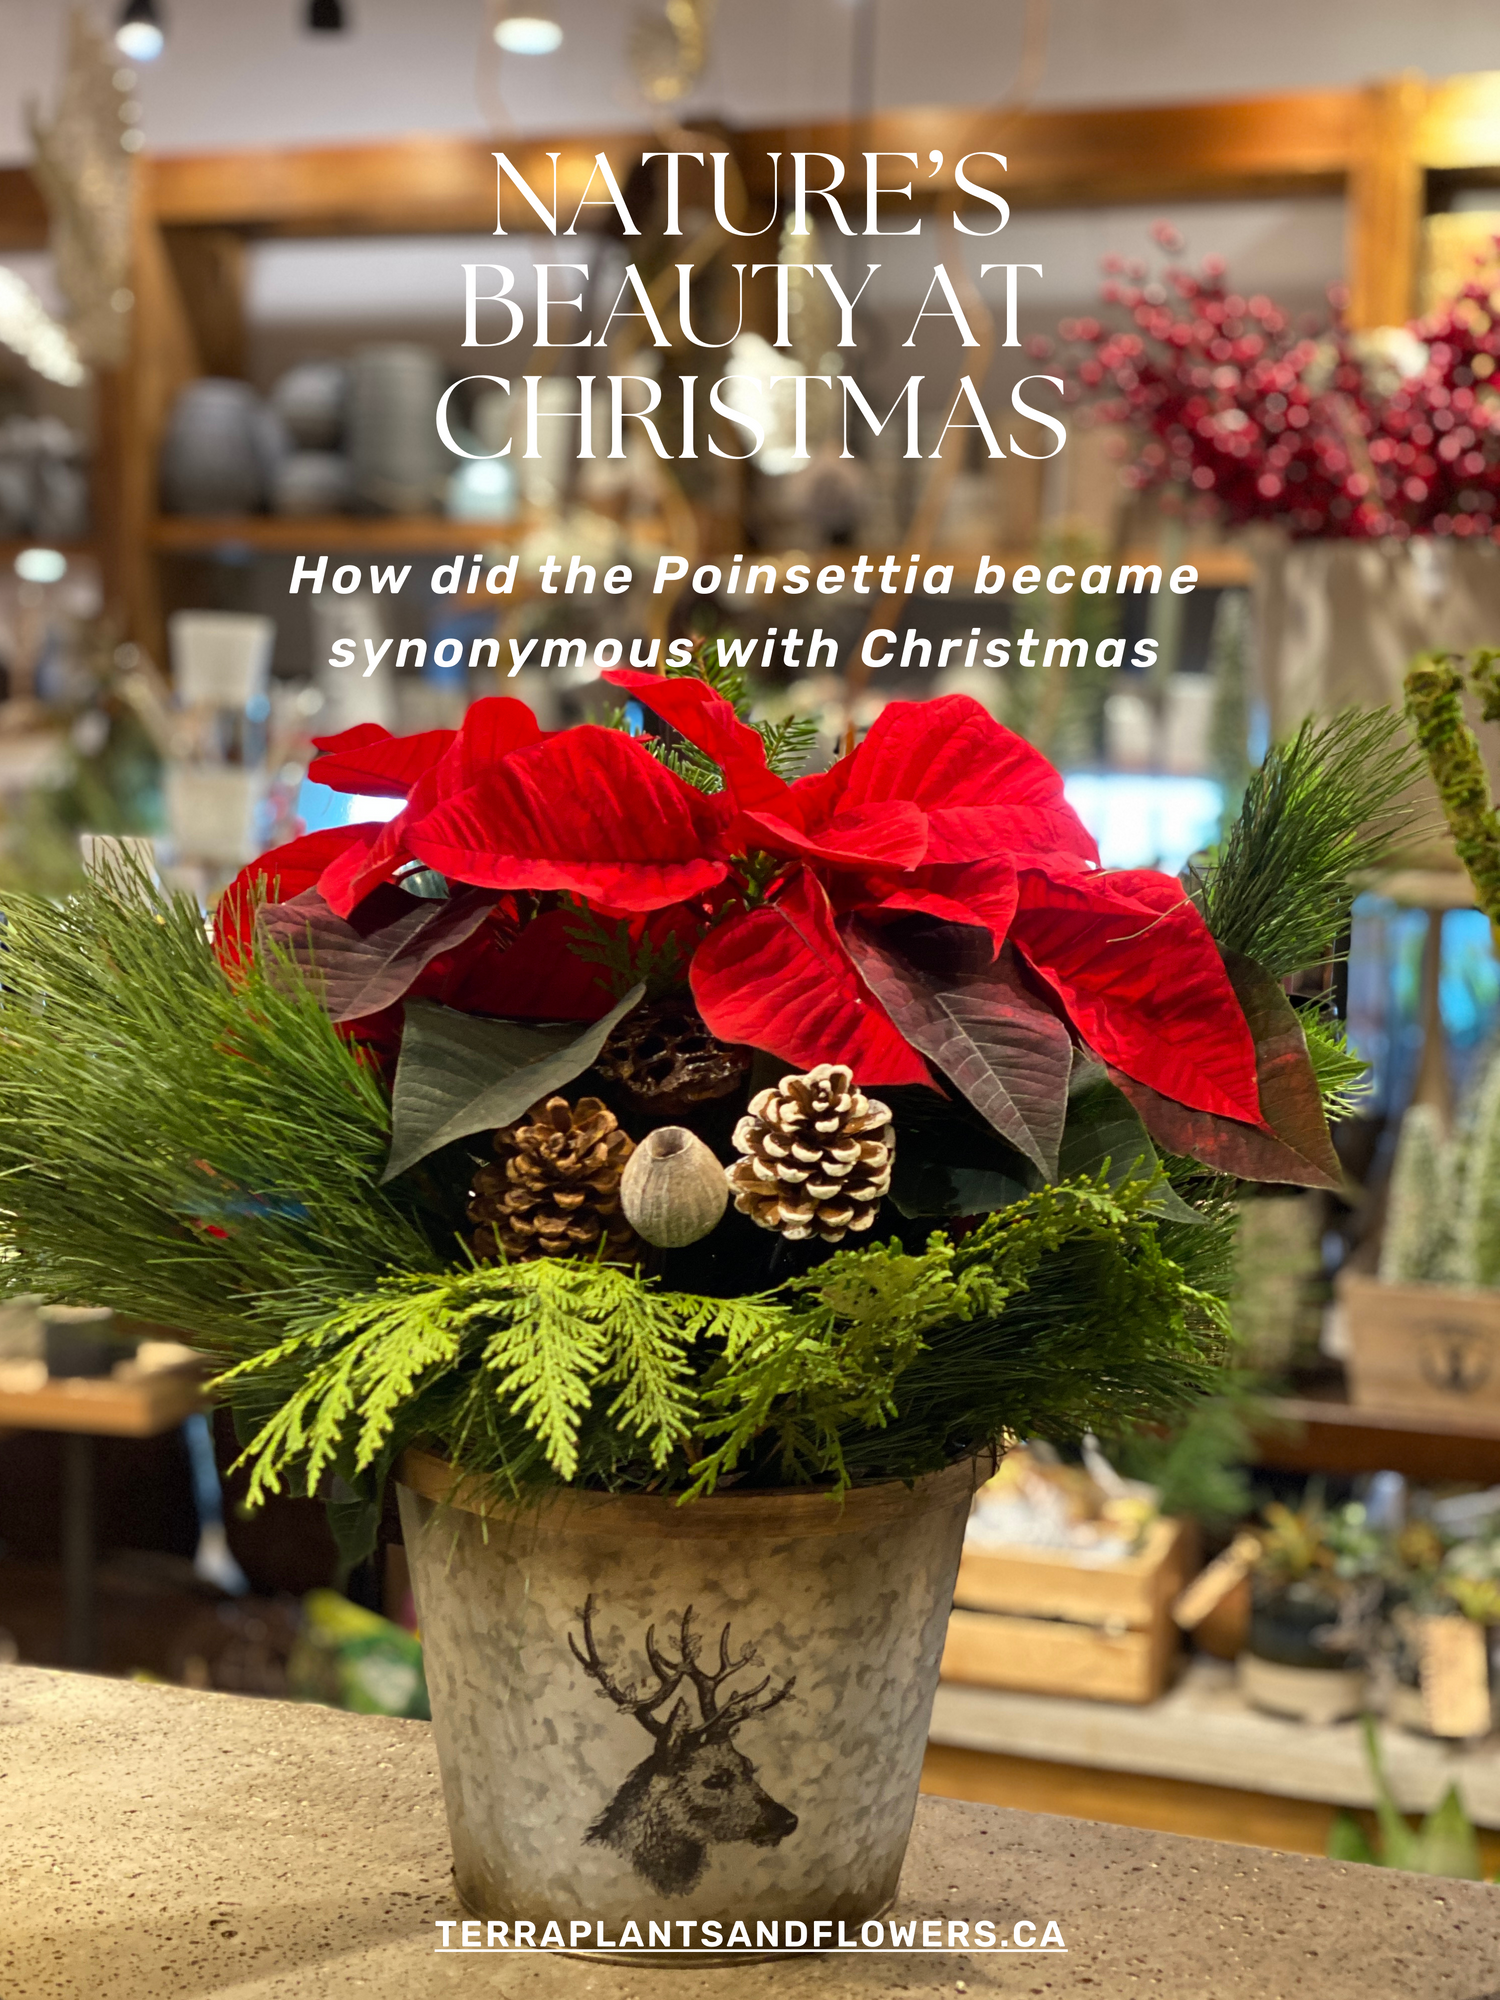 Why the Poinsettia is so well-known as a Christmas flower